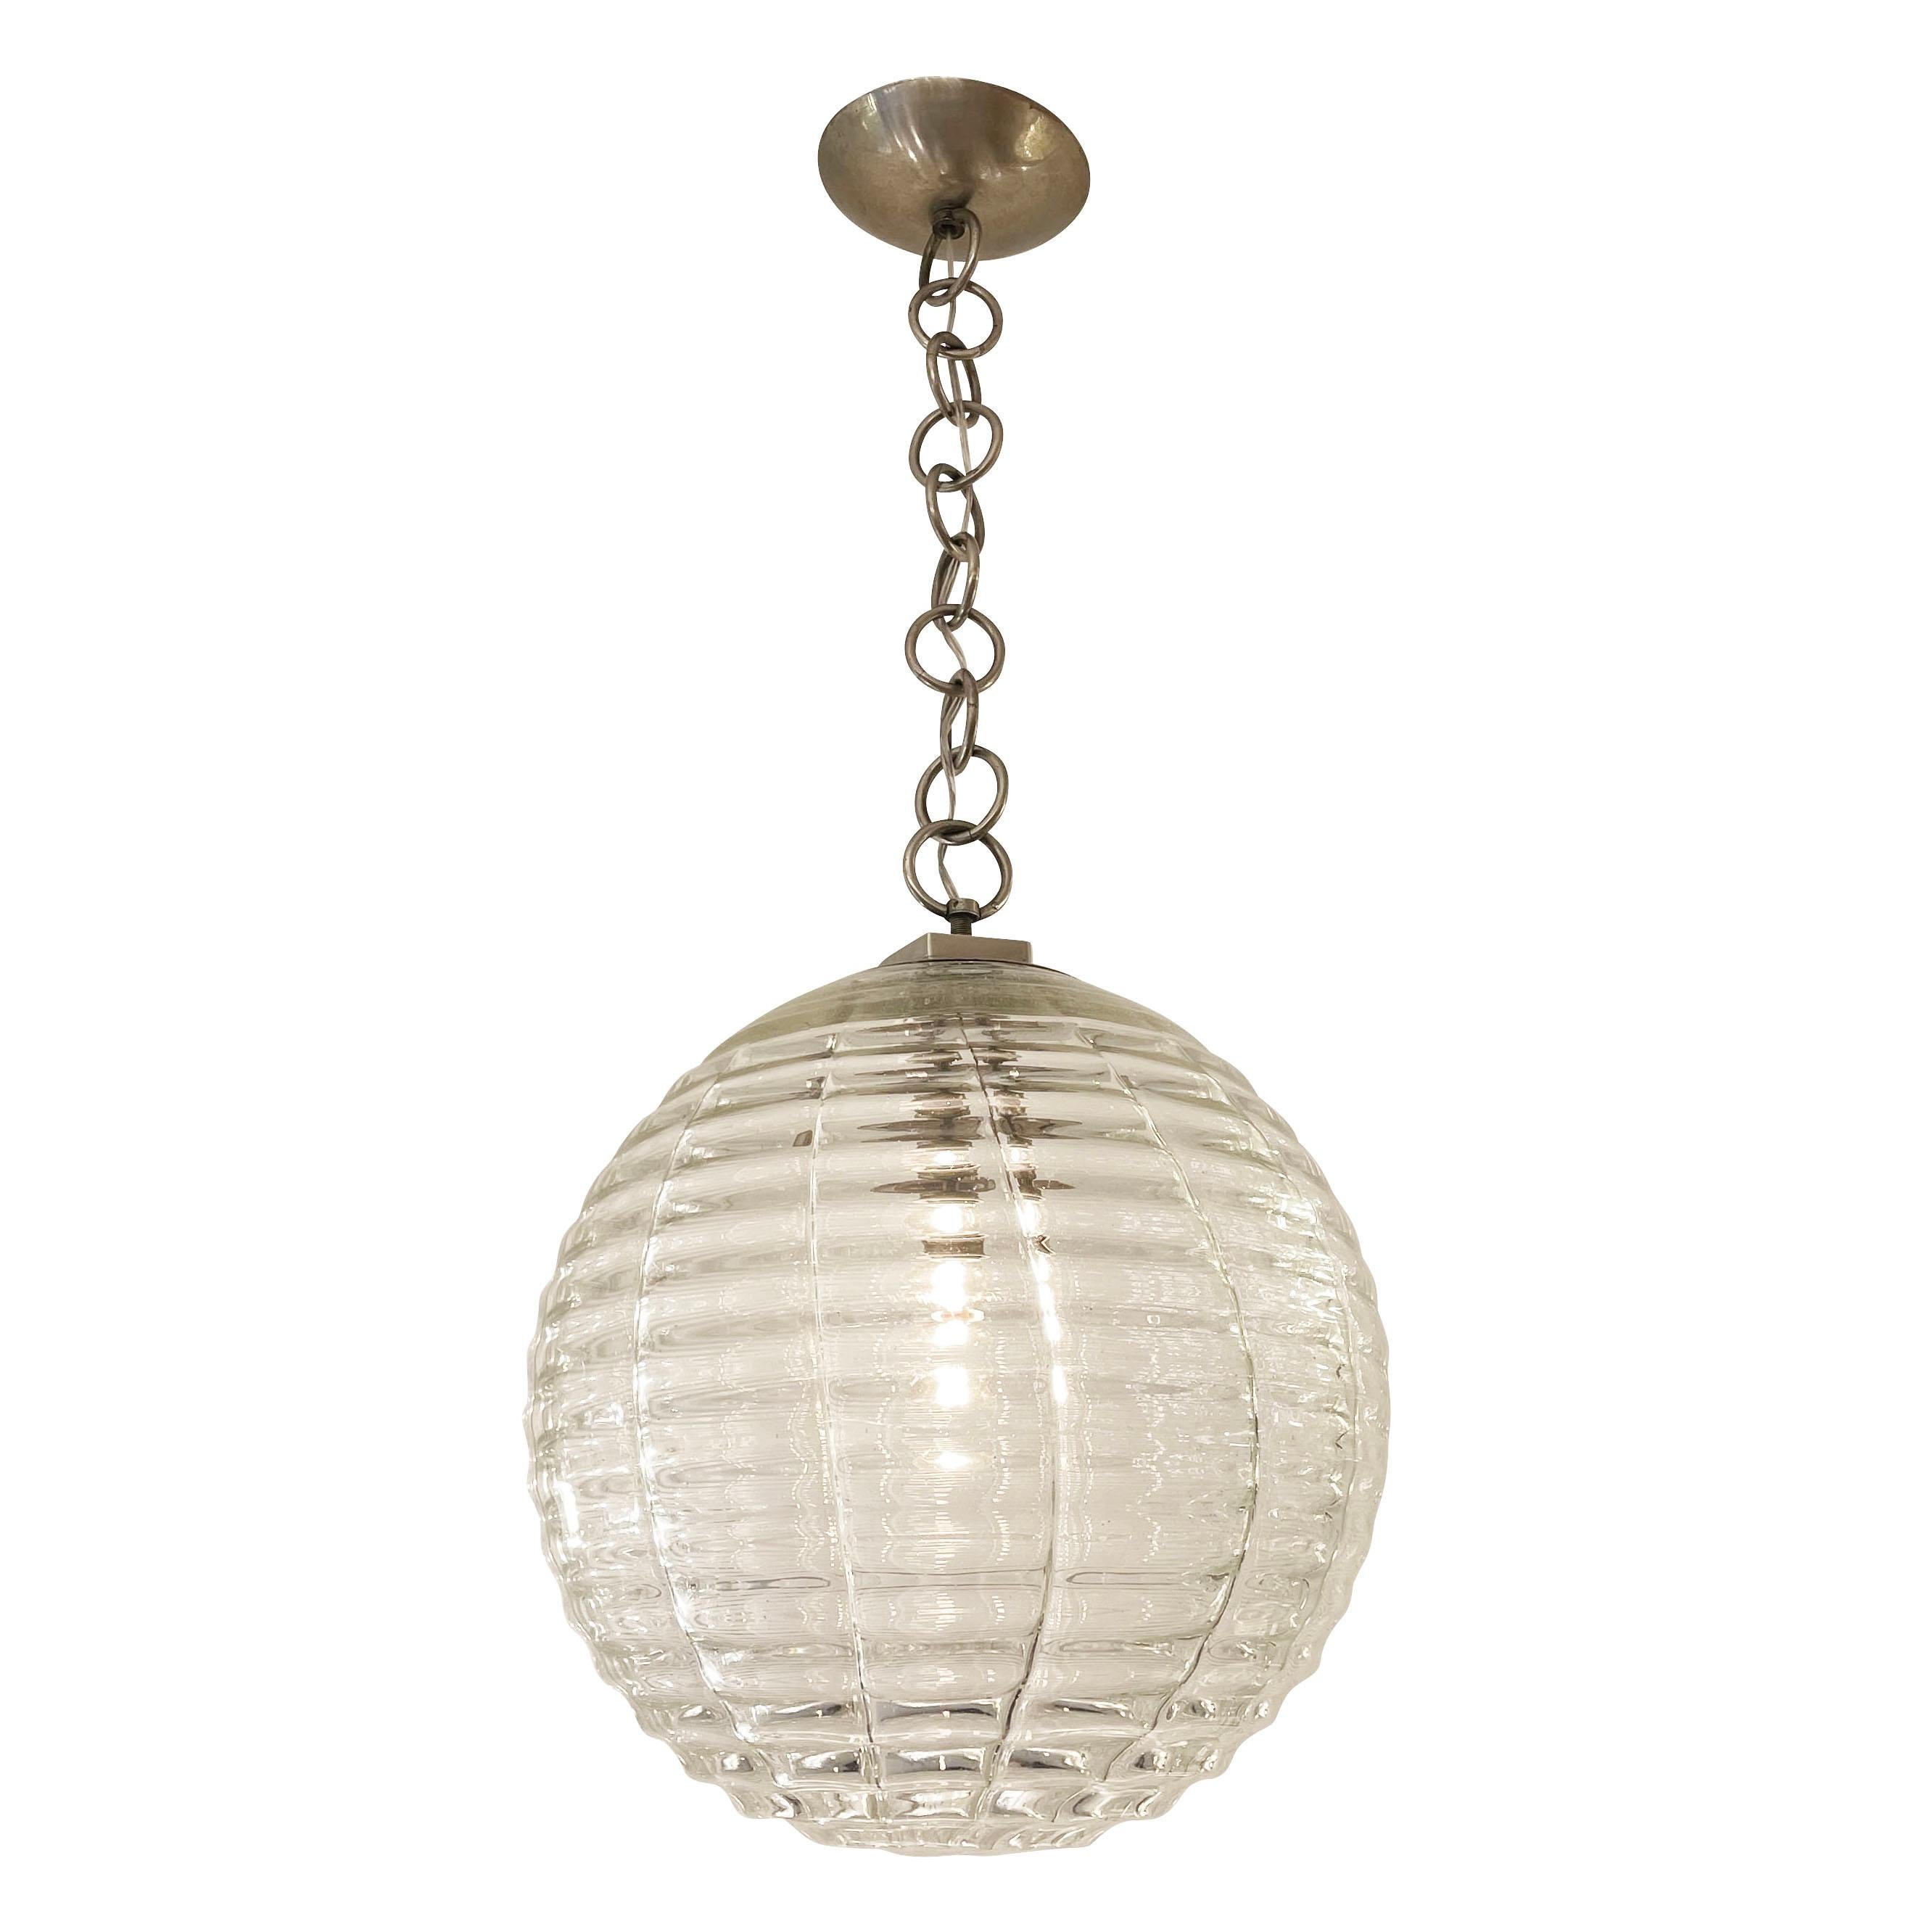 Handblown Murano glass pendant made by Venini in the 1940s. Chain and mounting hardware are nickel. A second with slight differences is also available if a pair is required. Holds one regular socket.

Condition: Excellent vintage condition, minor